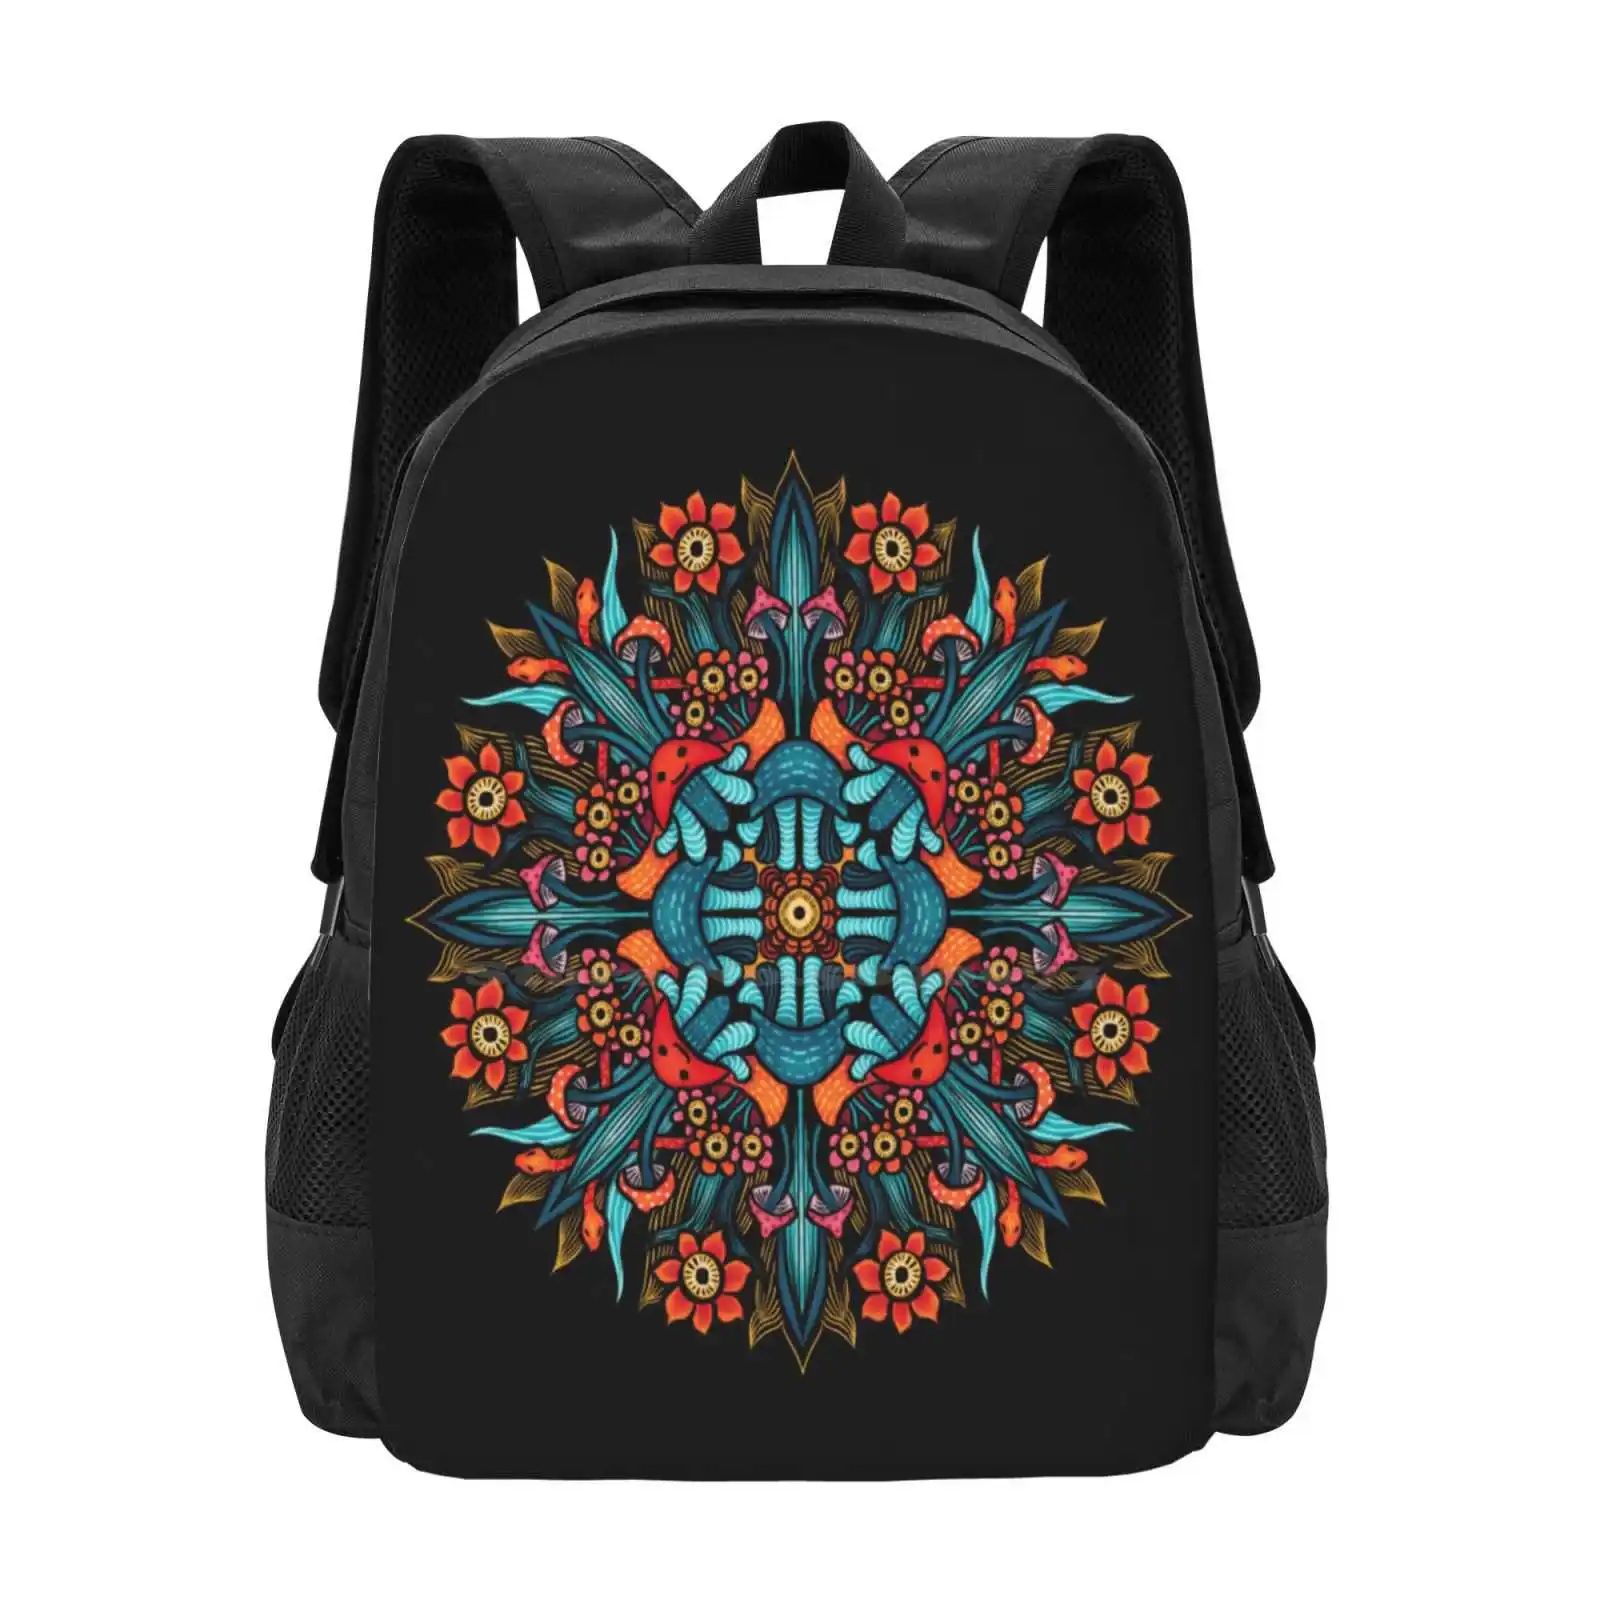 

Trippy Hippie Psychedelic Colorful Mandala With Mushrooms Bag Backpack For Men Women Girls Teenage Colorful Hippy Acid Hippie